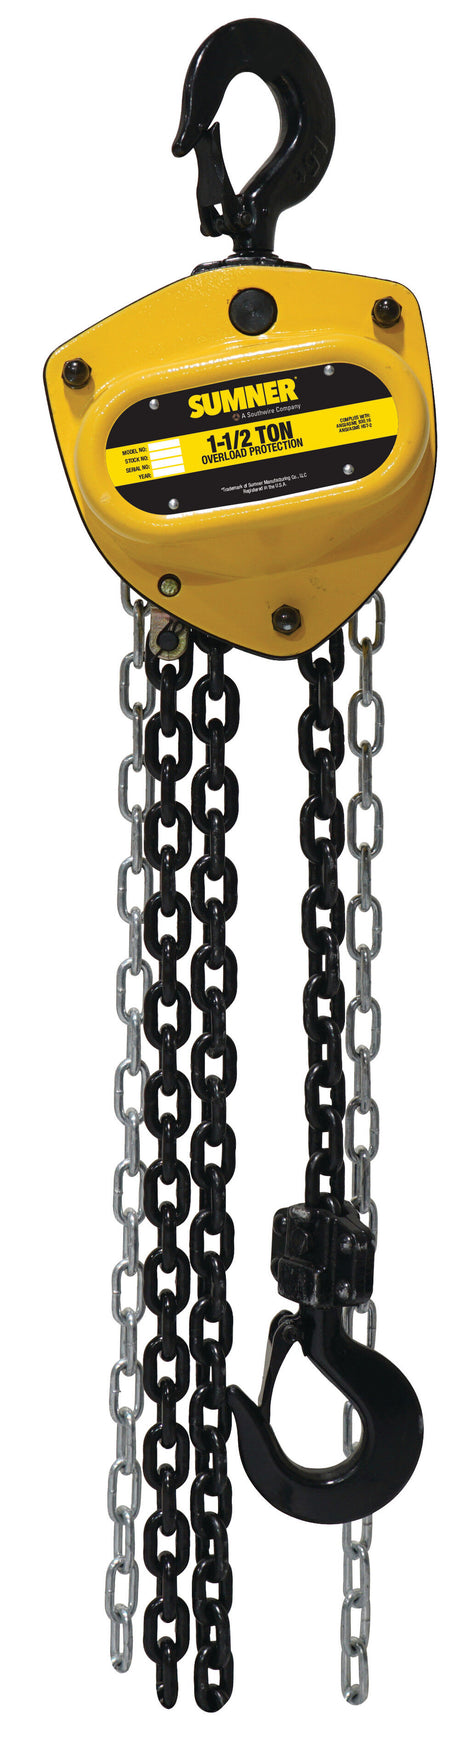 1-1/2 Ton Chain Hoist with 10 ft. Chain Fall and Overload Protection 787452